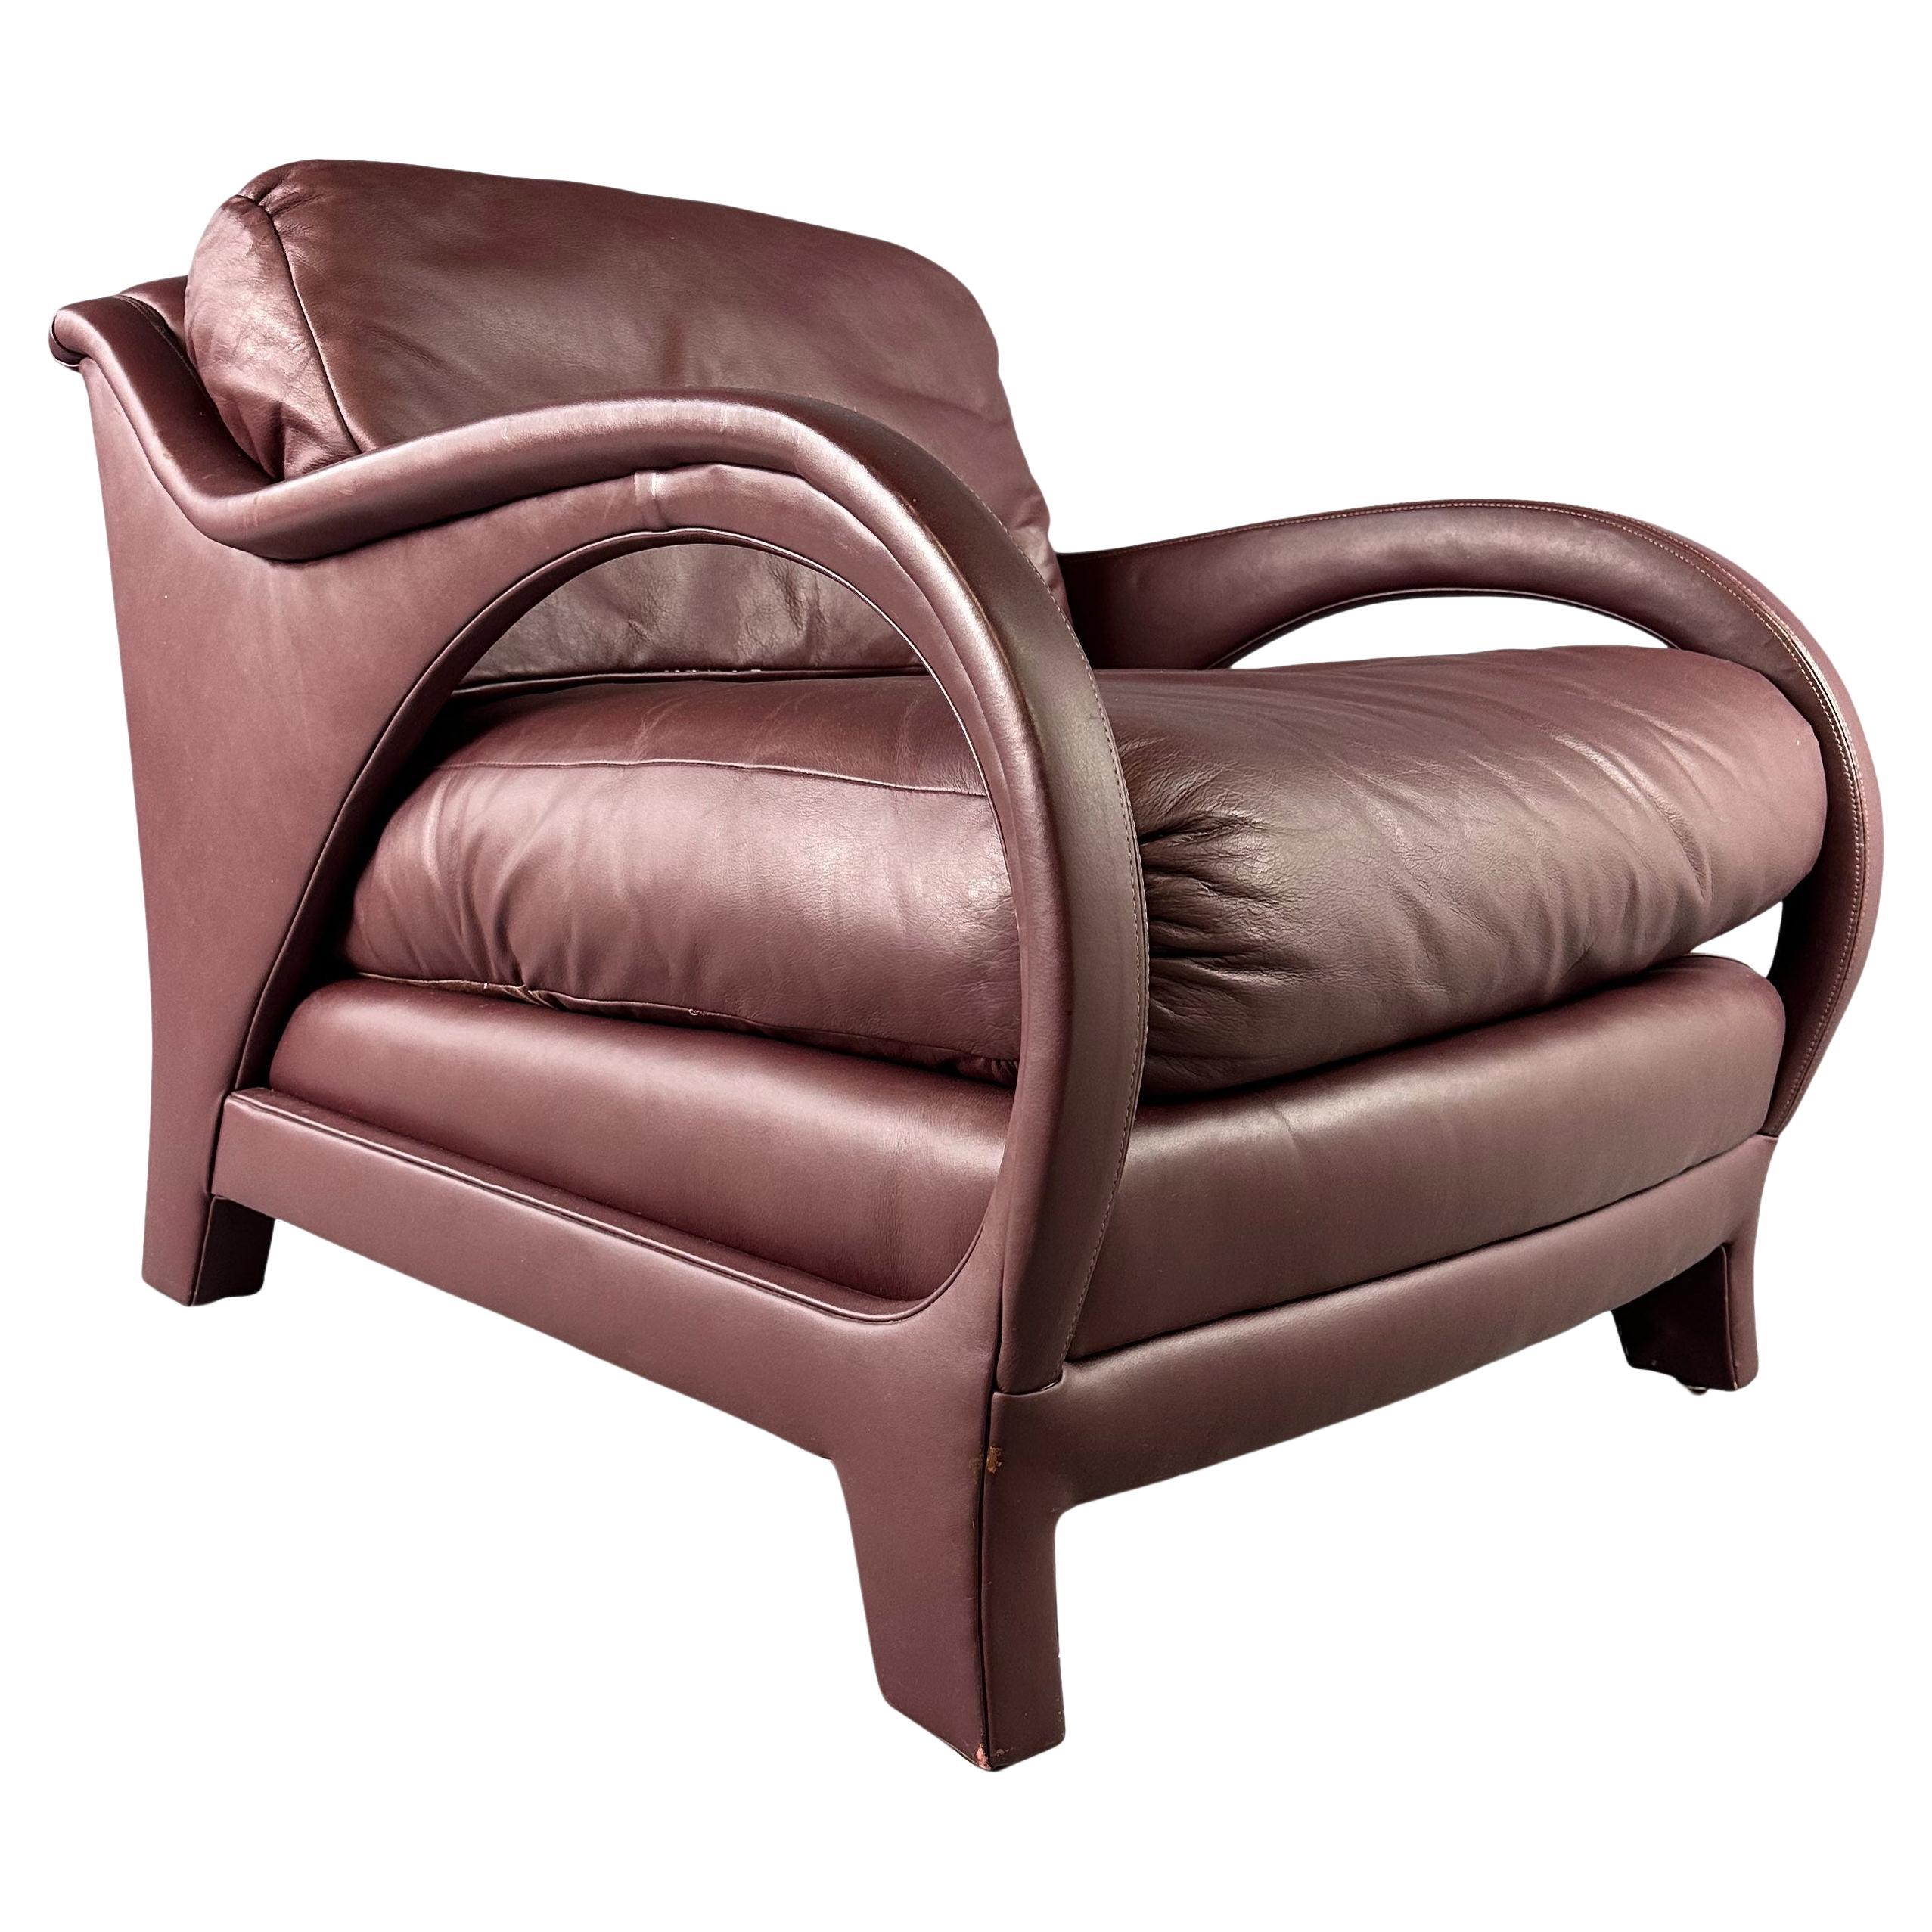 Jay Spectre Tycoon Leather Lounge Chair in Burgundy For Century For Sale